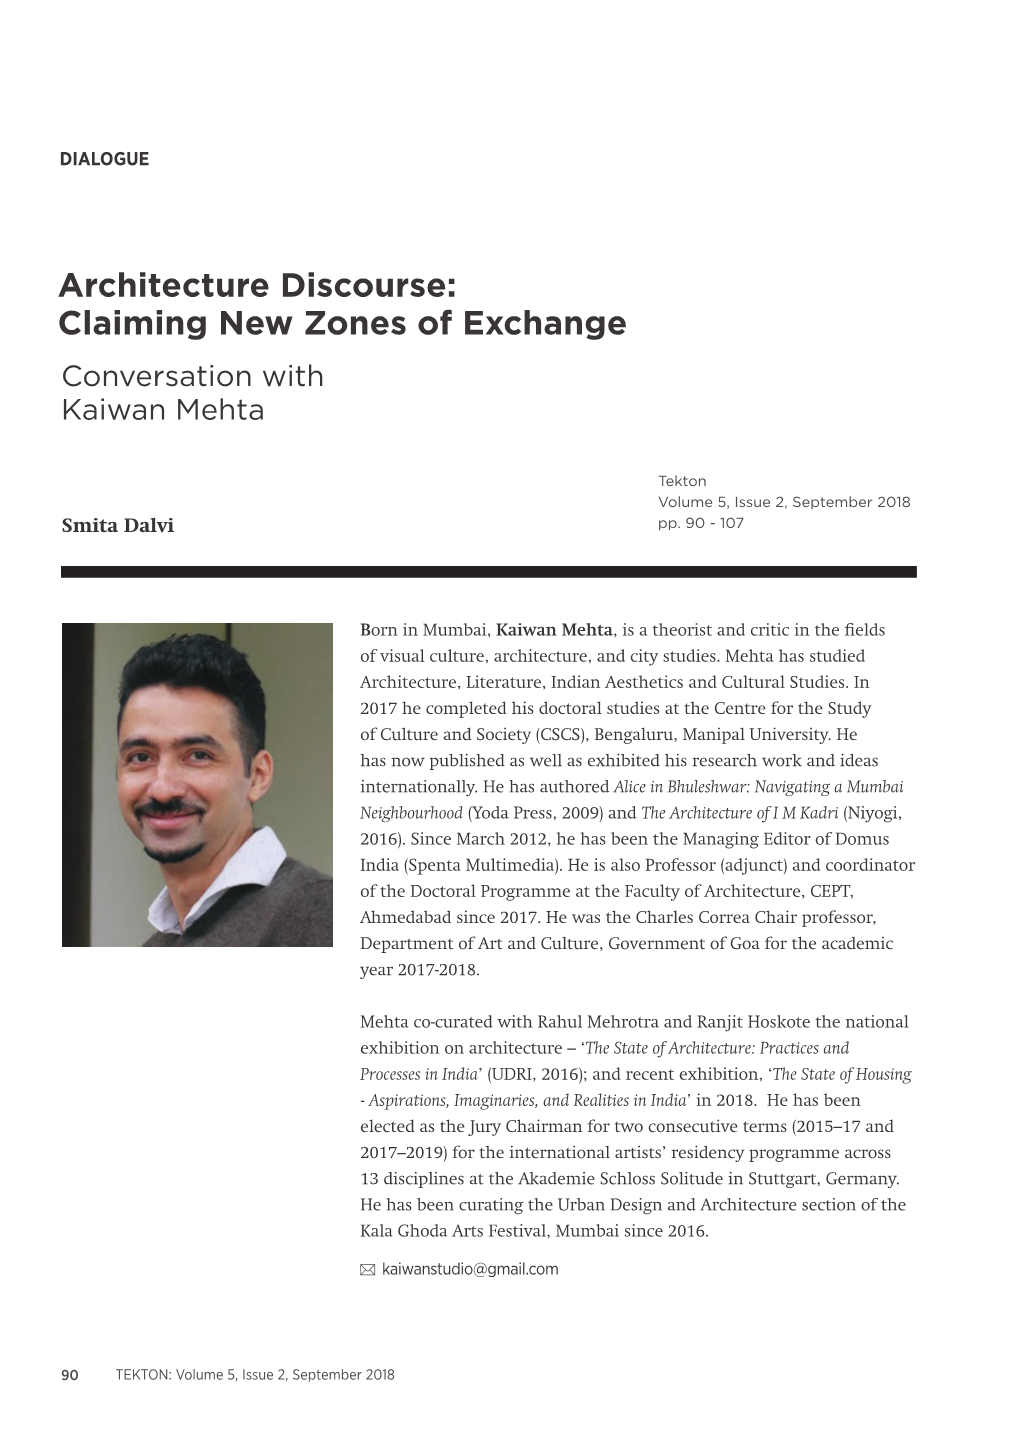 Architecture Discourse: Claiming New Zones of Exchange Conversation with Kaiwan Mehta